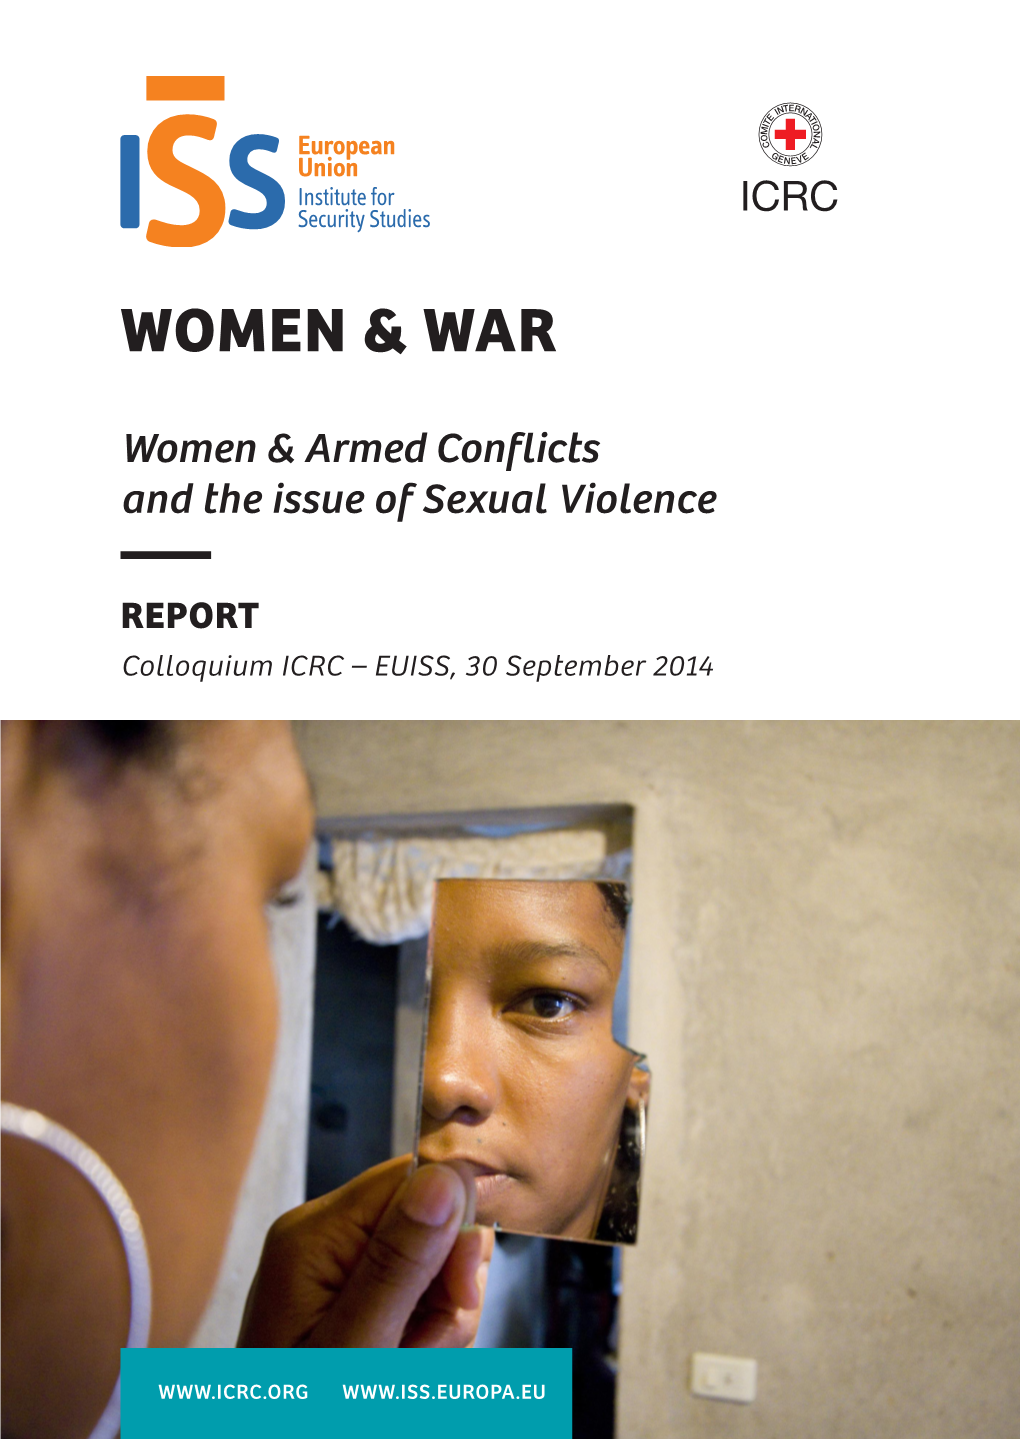 WOMEN & WAR Women & Armed Conflicts and the Issue of Sexual